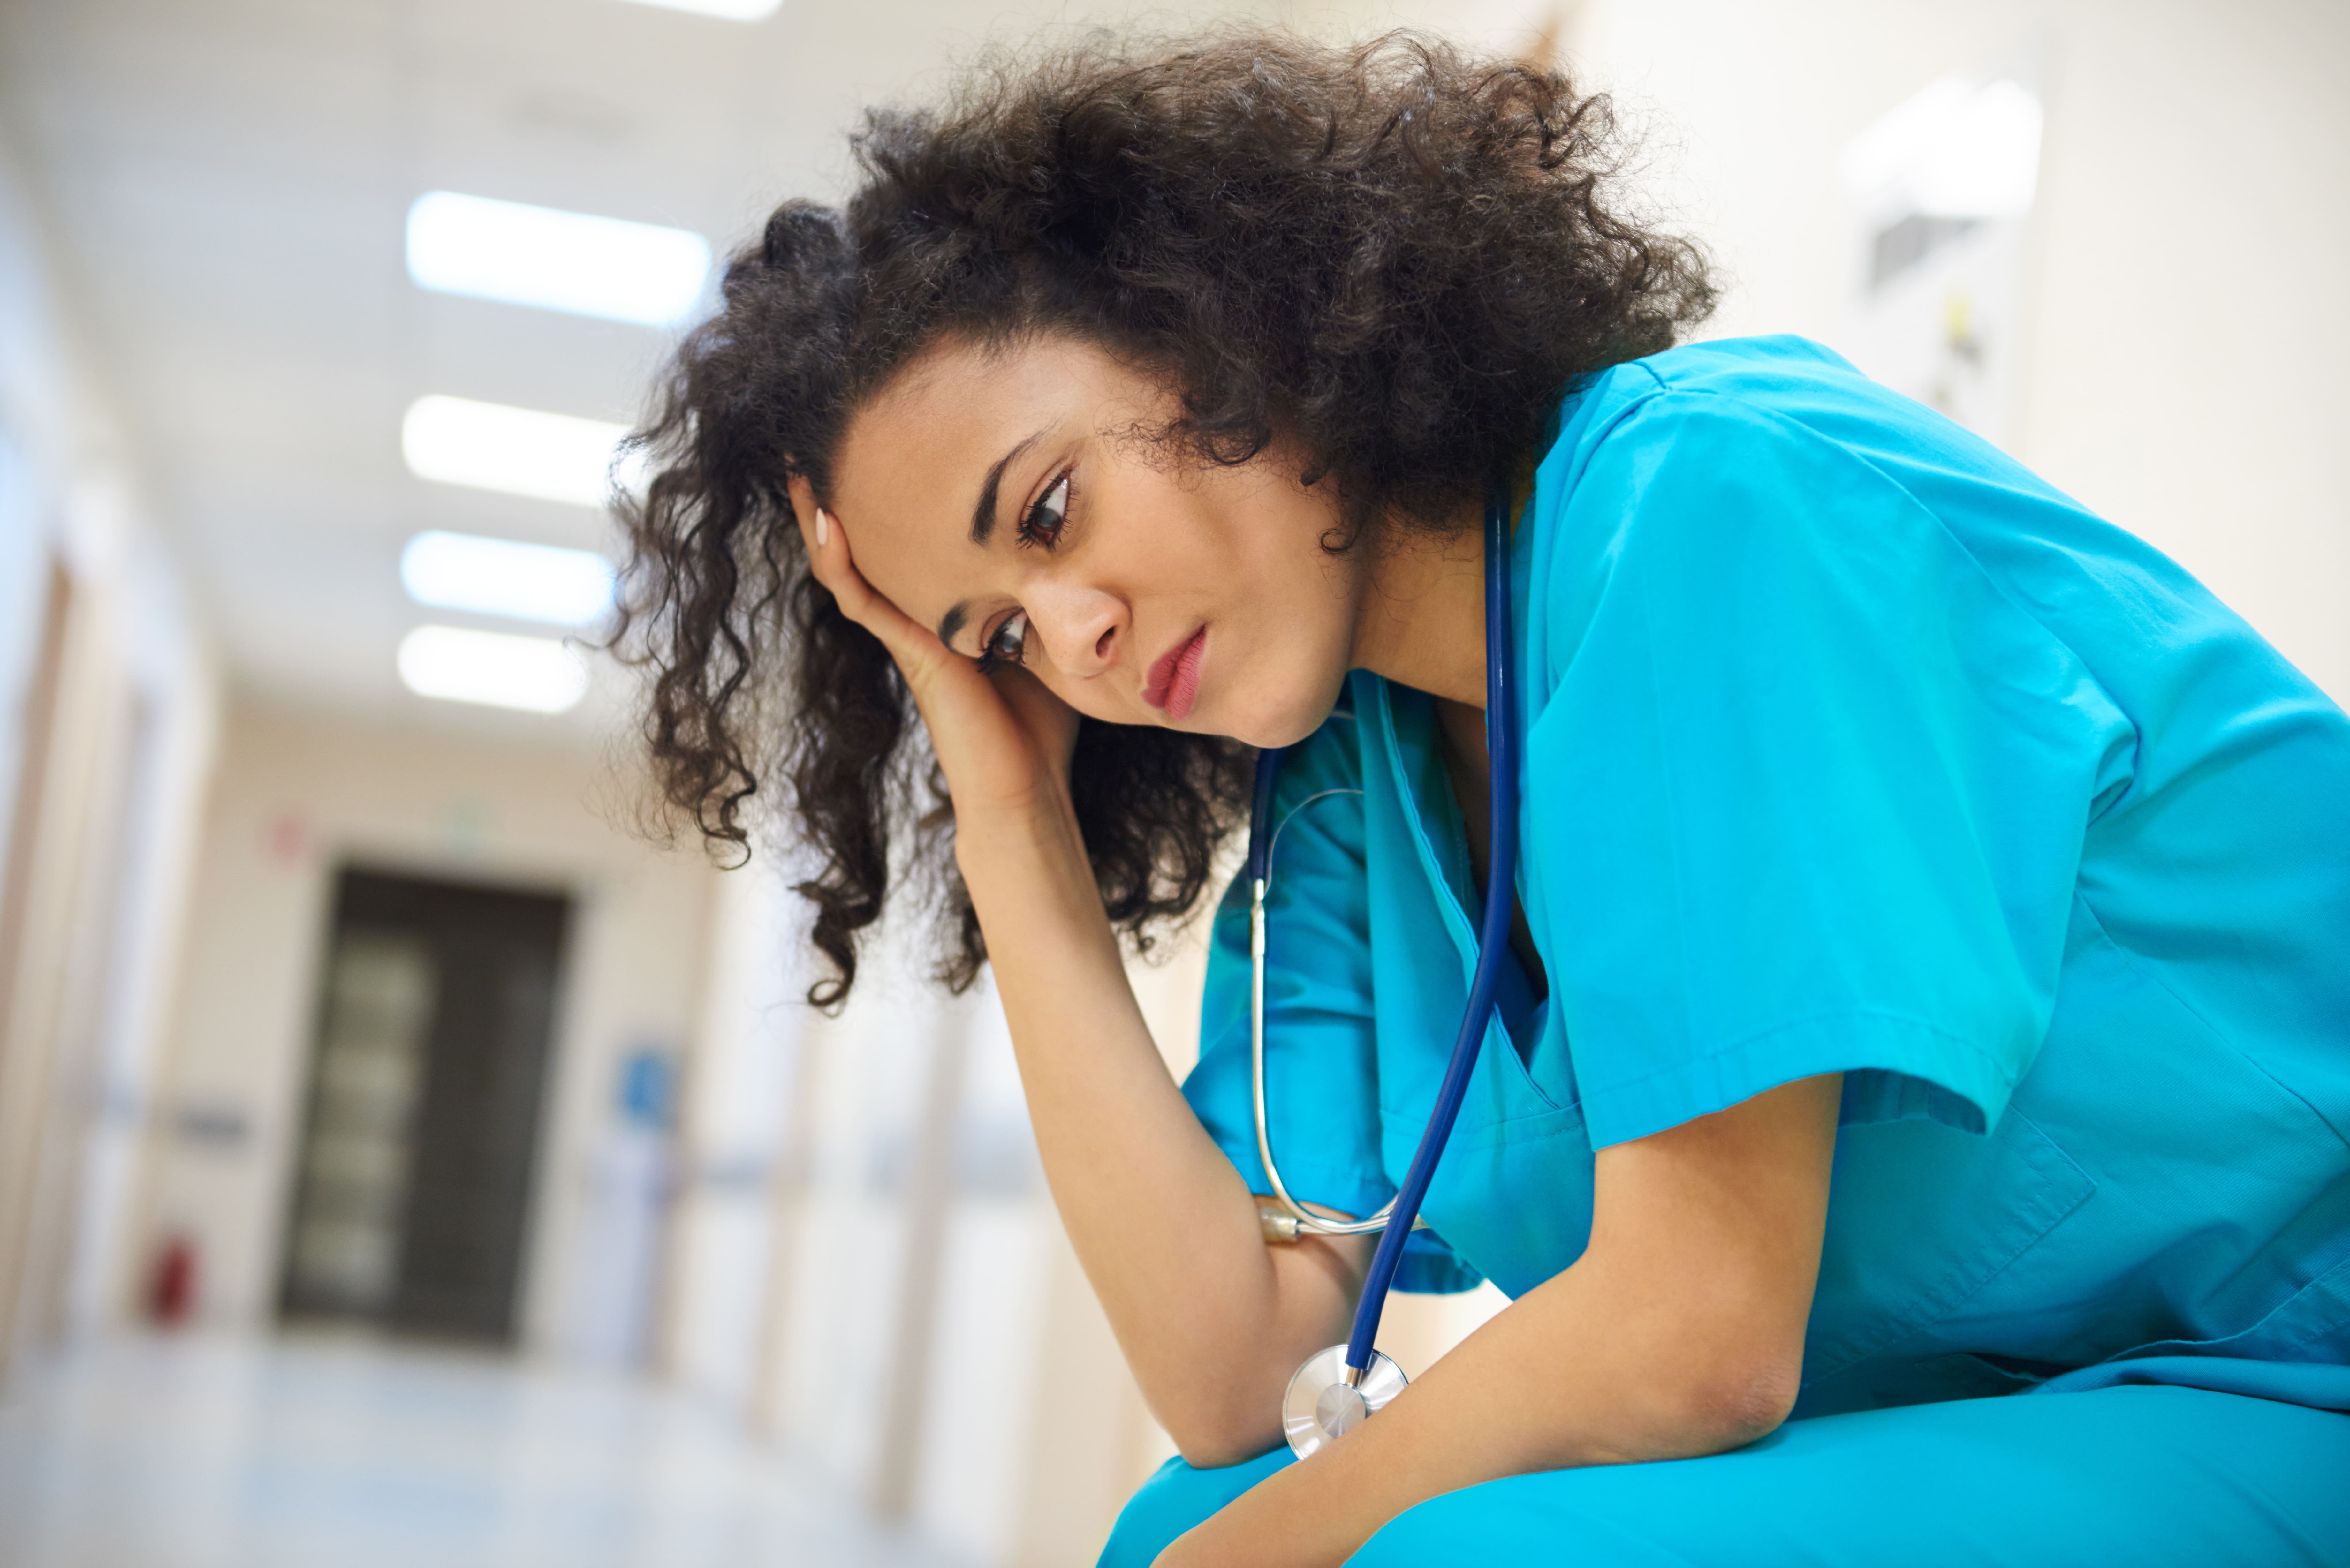 Physician Burnout – A Growing Medical Crisis in the USA